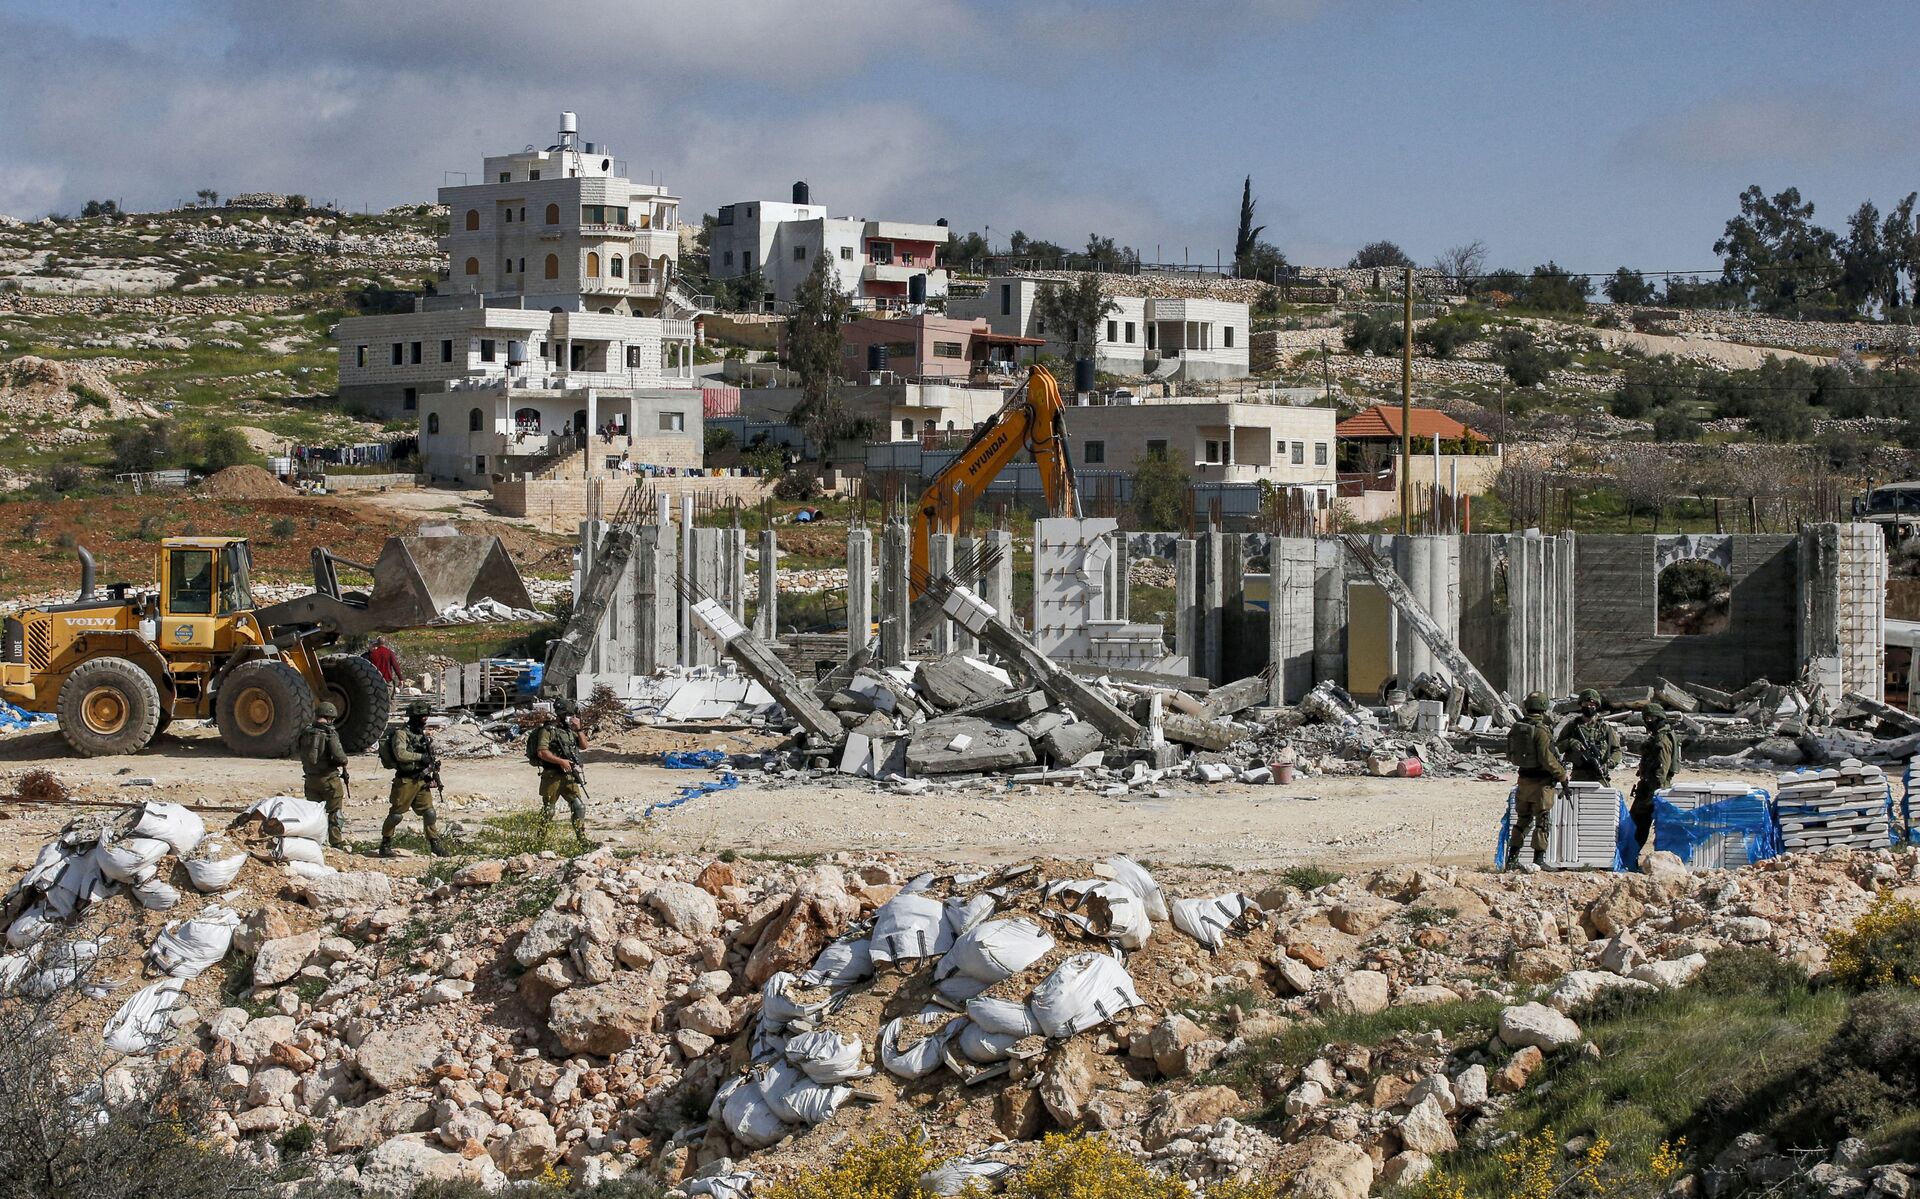 Israeli soldiers stand by as excavators demolish a Palestinian house (still under construction) located within the area C (where Israel retains full control over planning and construction) southeast of Hebron in the occupied West Bank on March 8, 2021. - Sputnik International, 1920, 07.09.2021